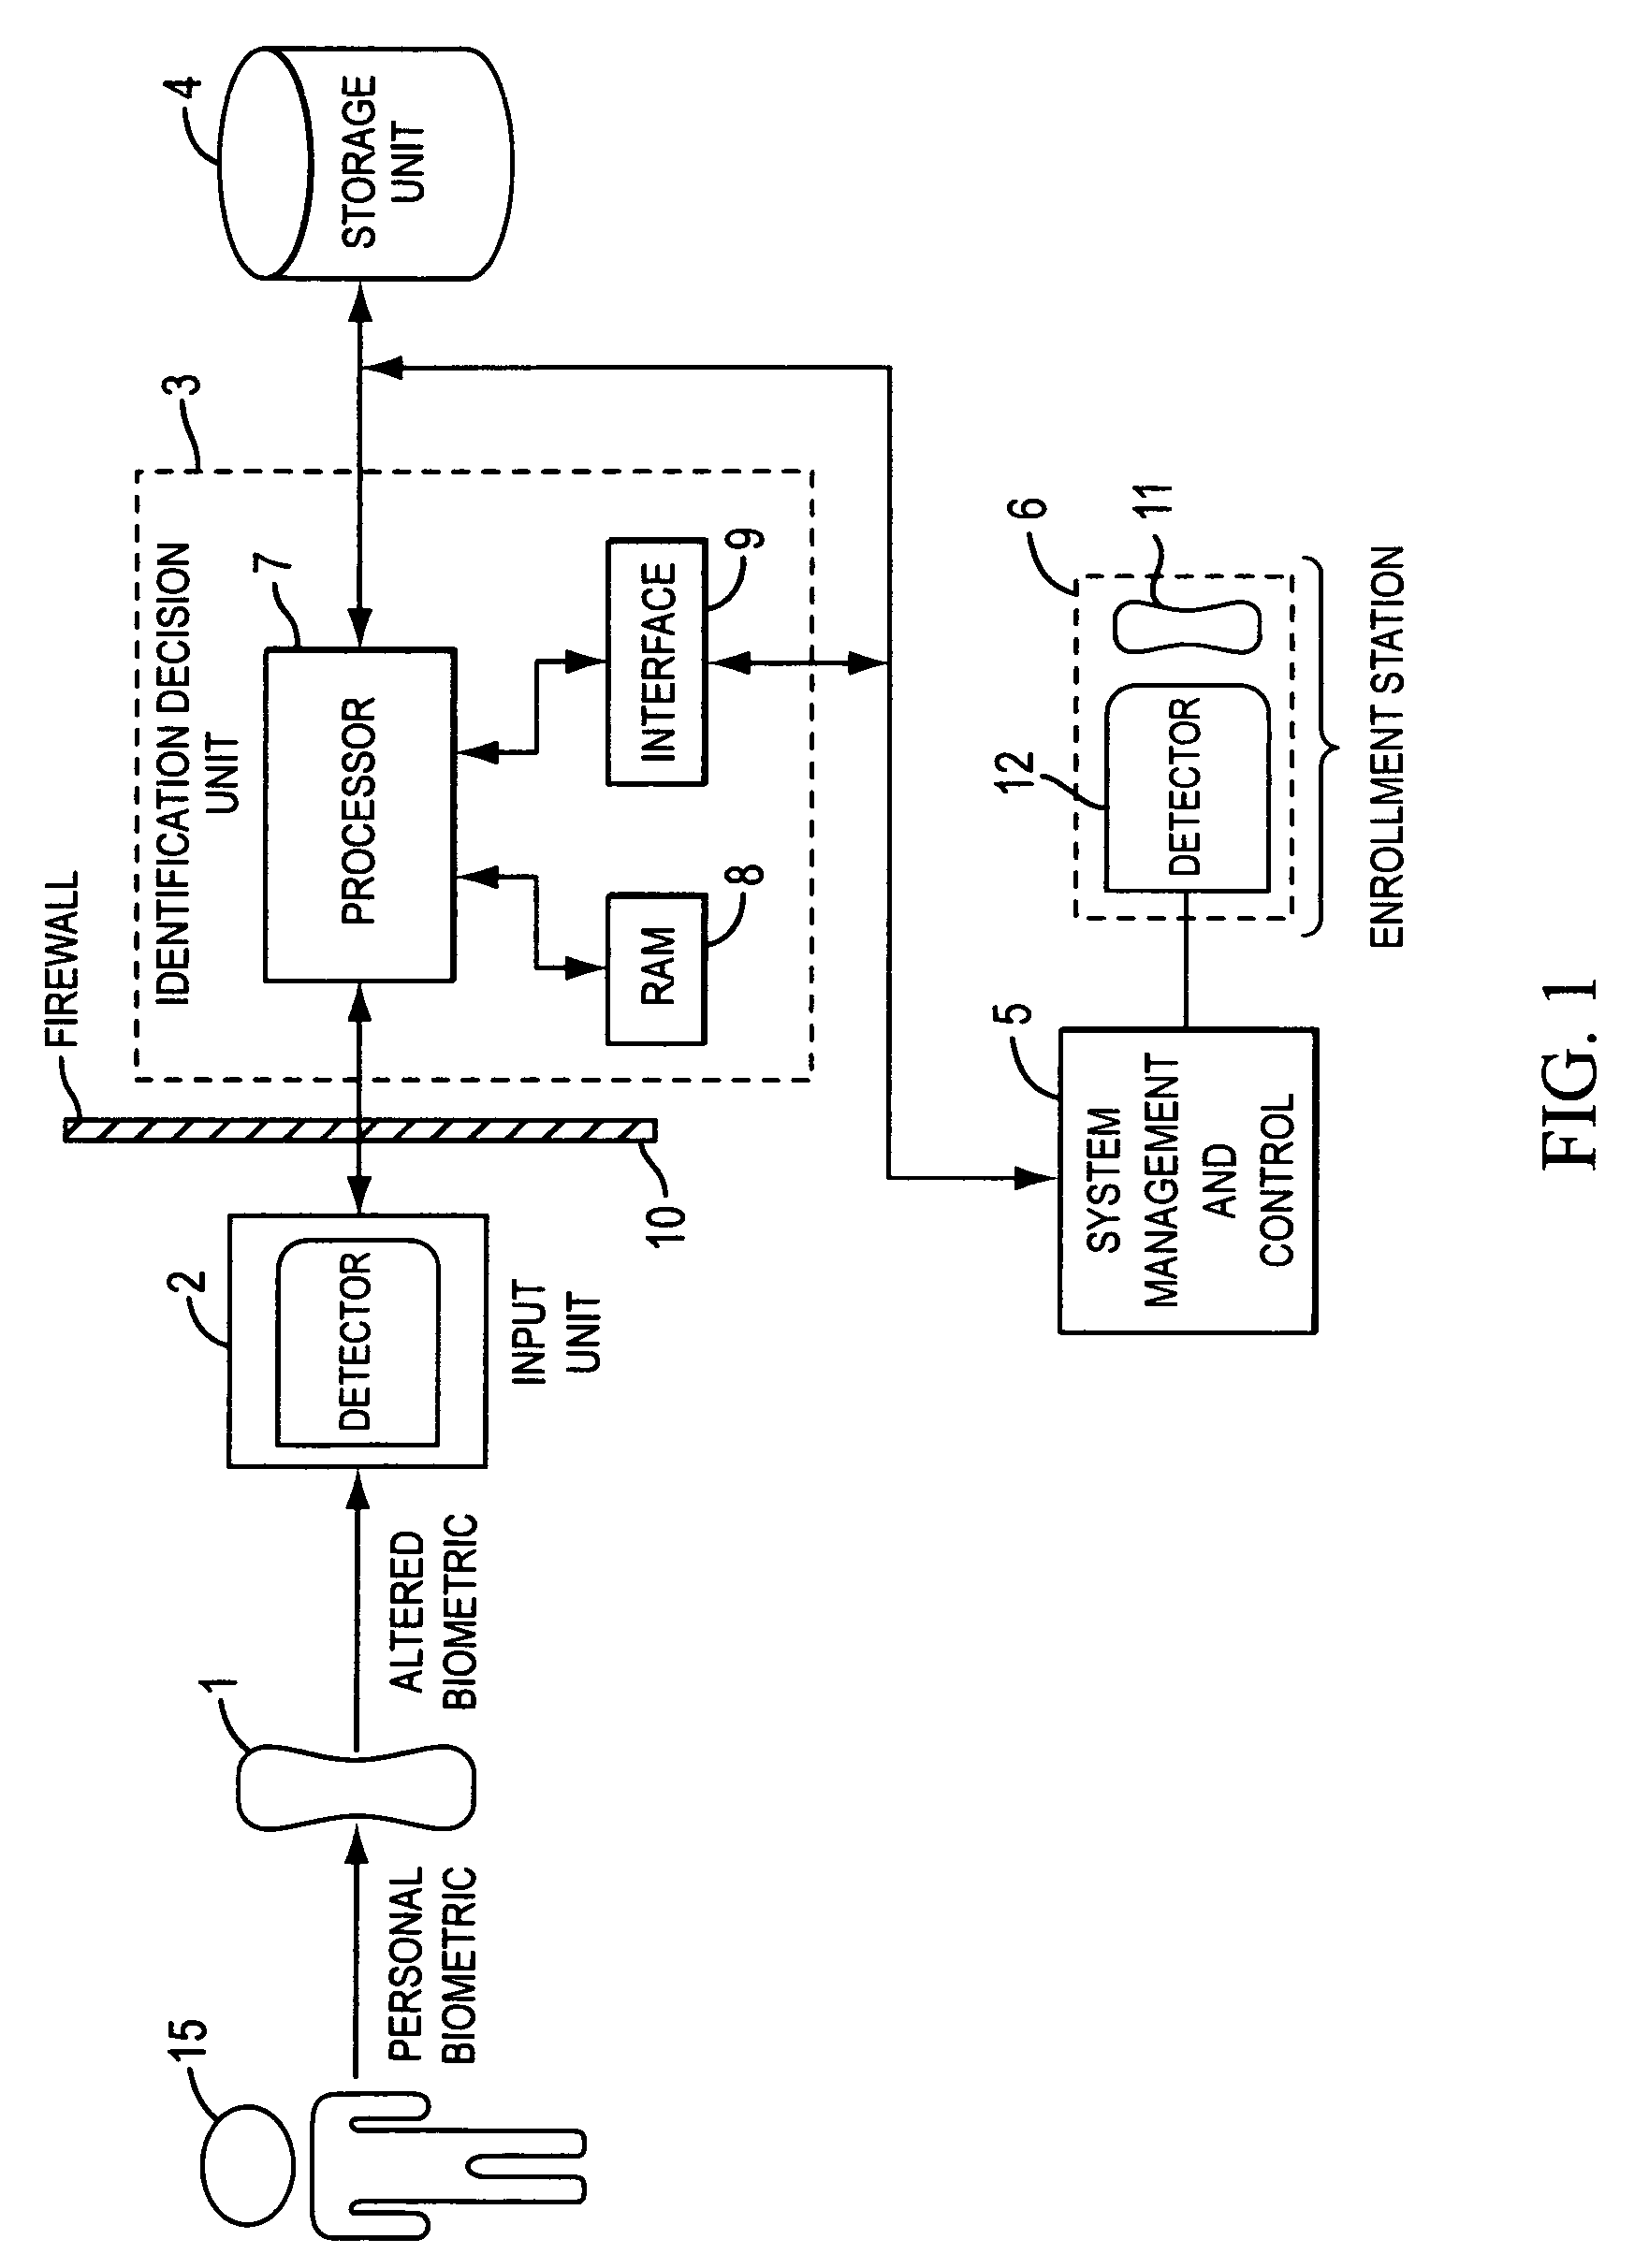 Recoverable biometric identity system and method